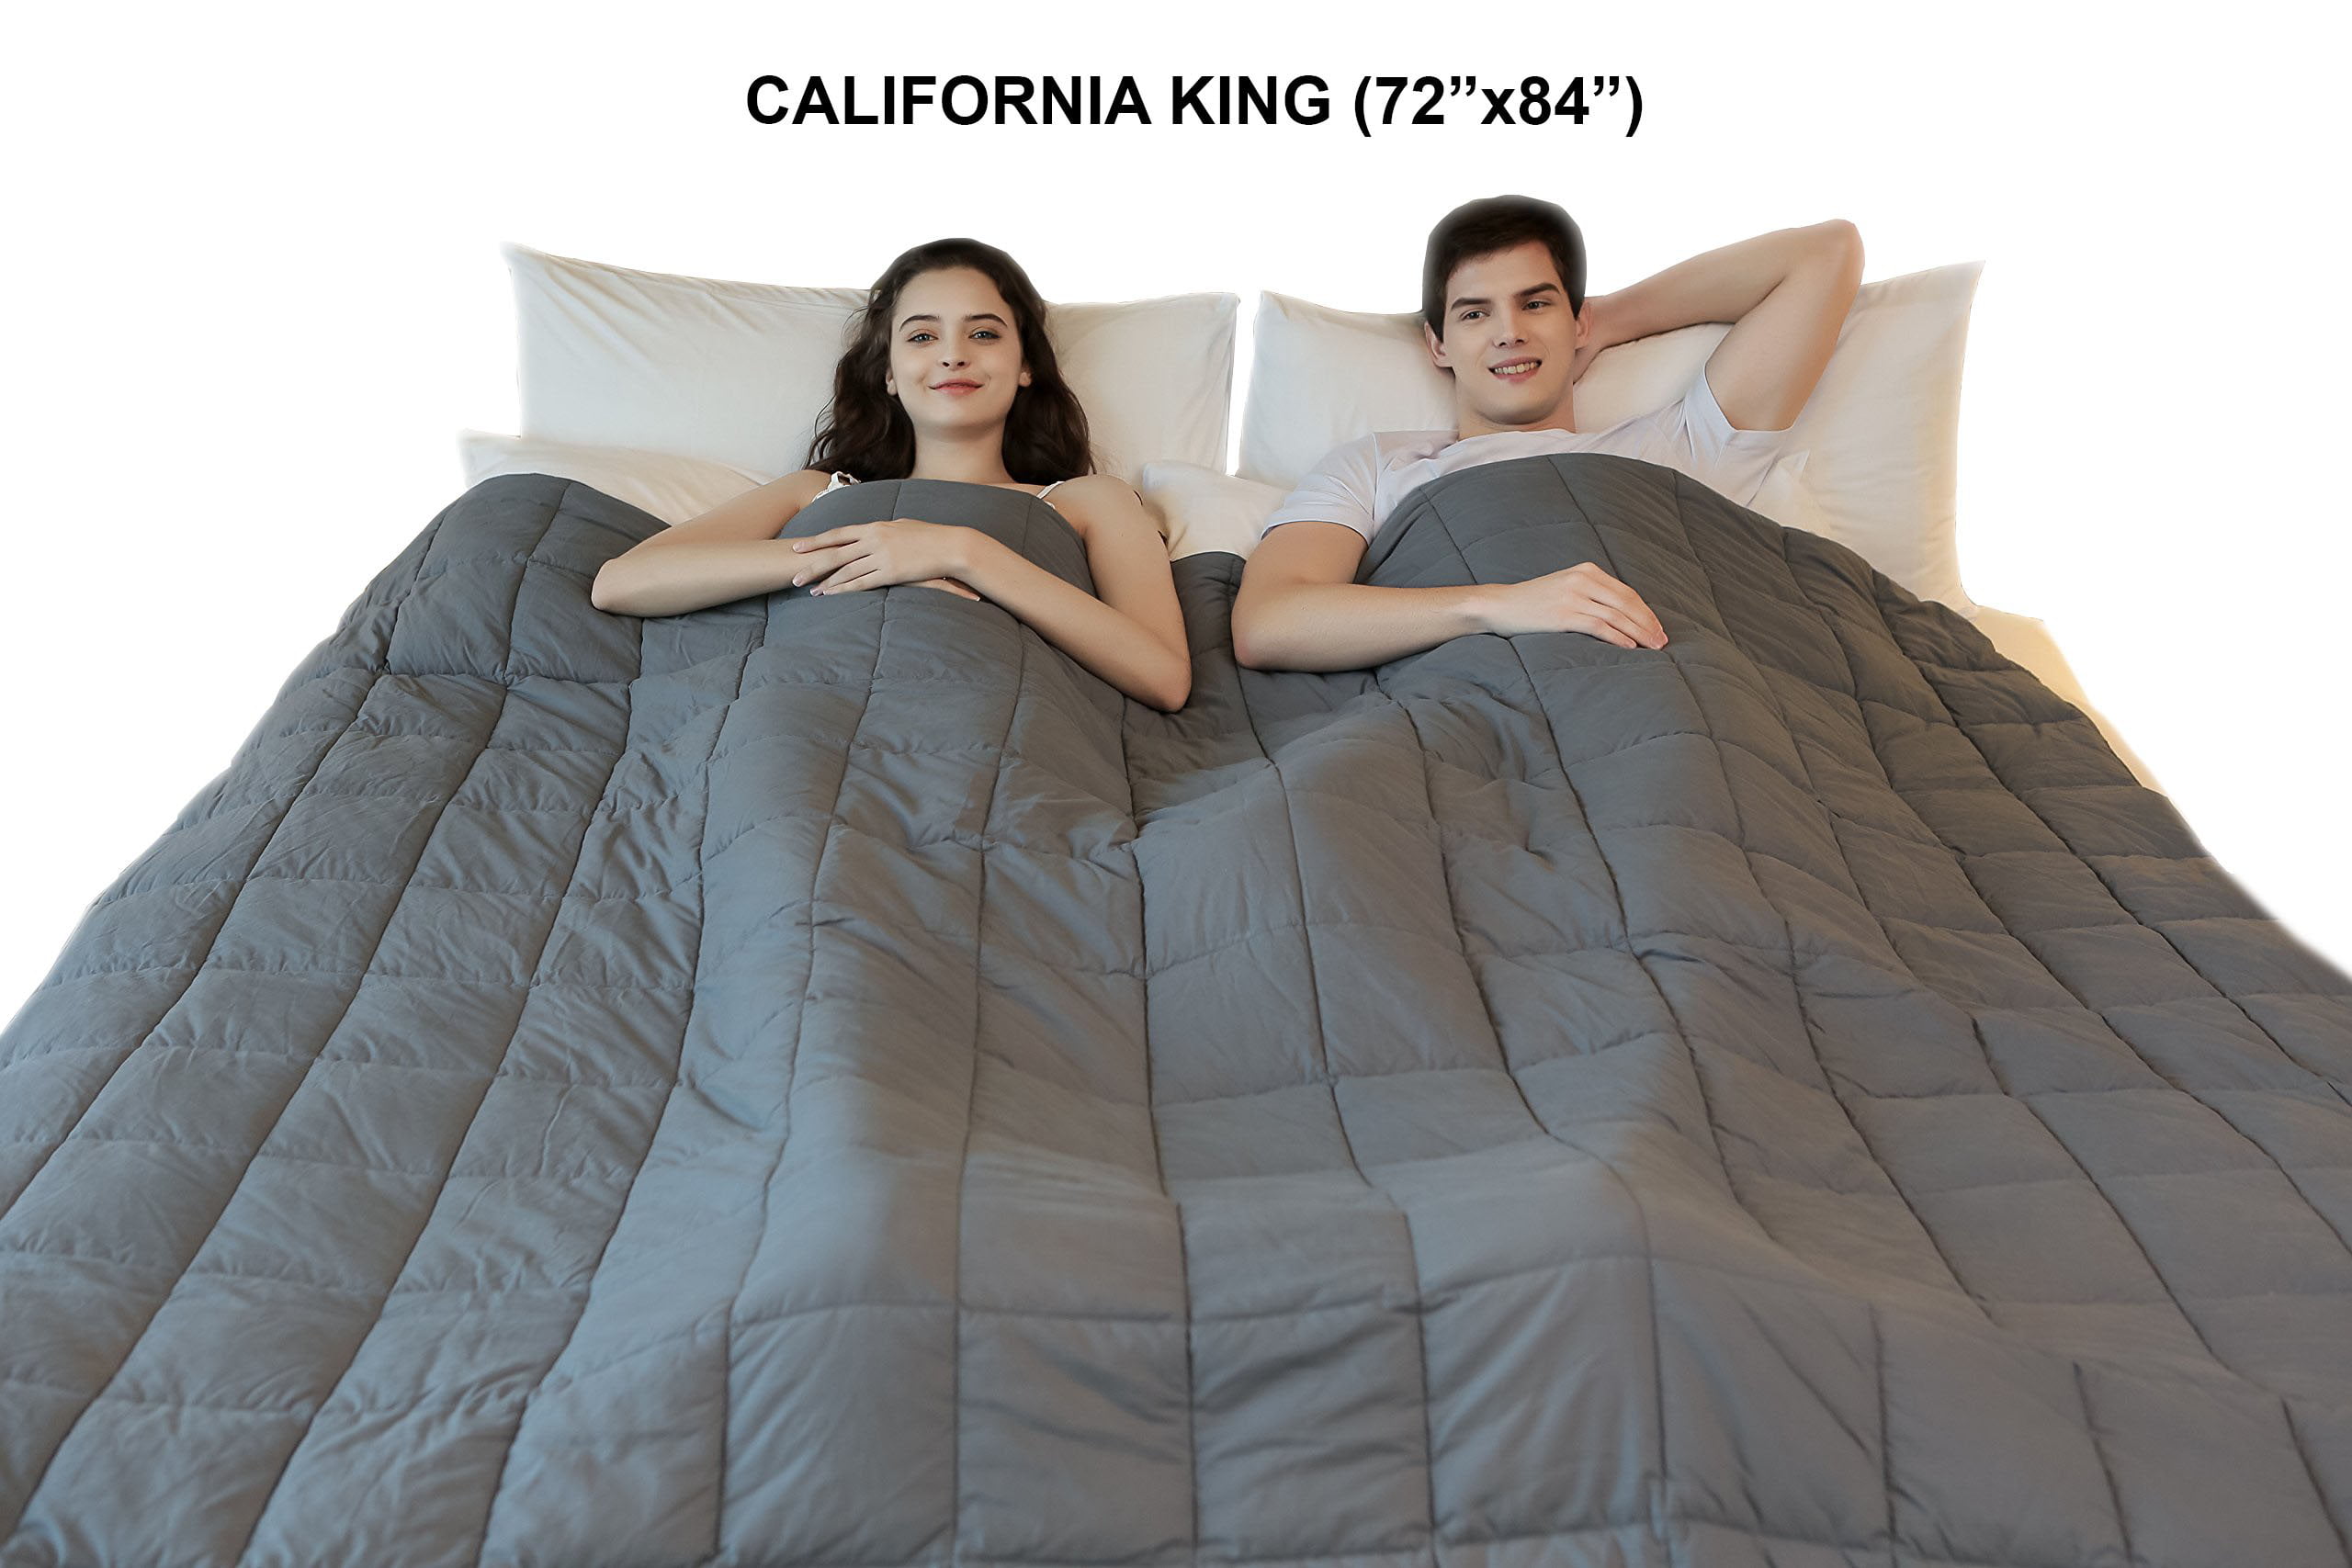 California King Sized Weighted Blanket - Soft Weighted Throw Blanket